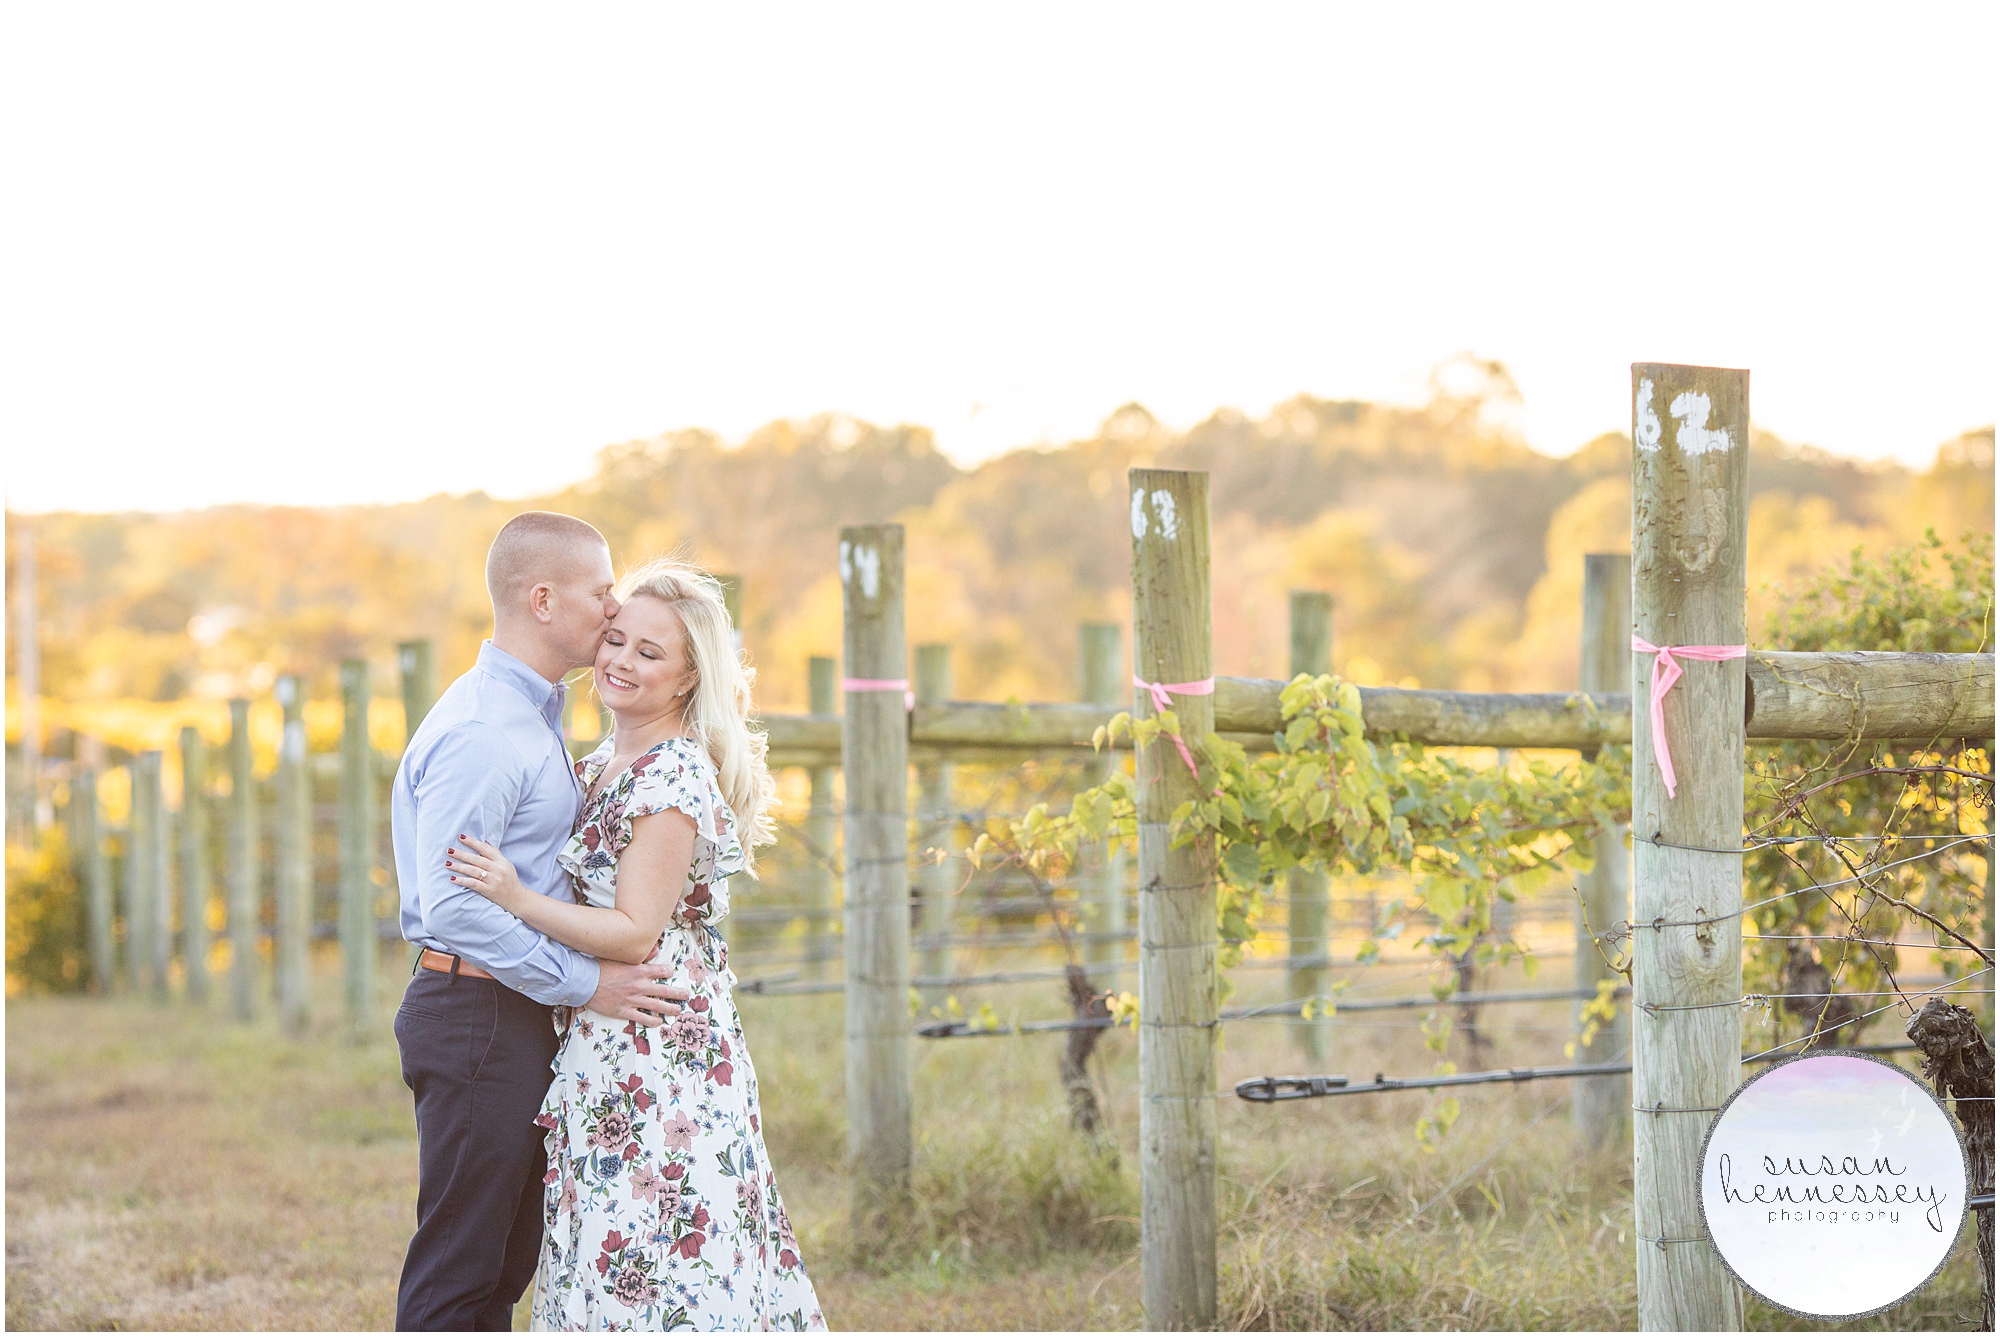 Laurita Winery Engagement Session at sunset